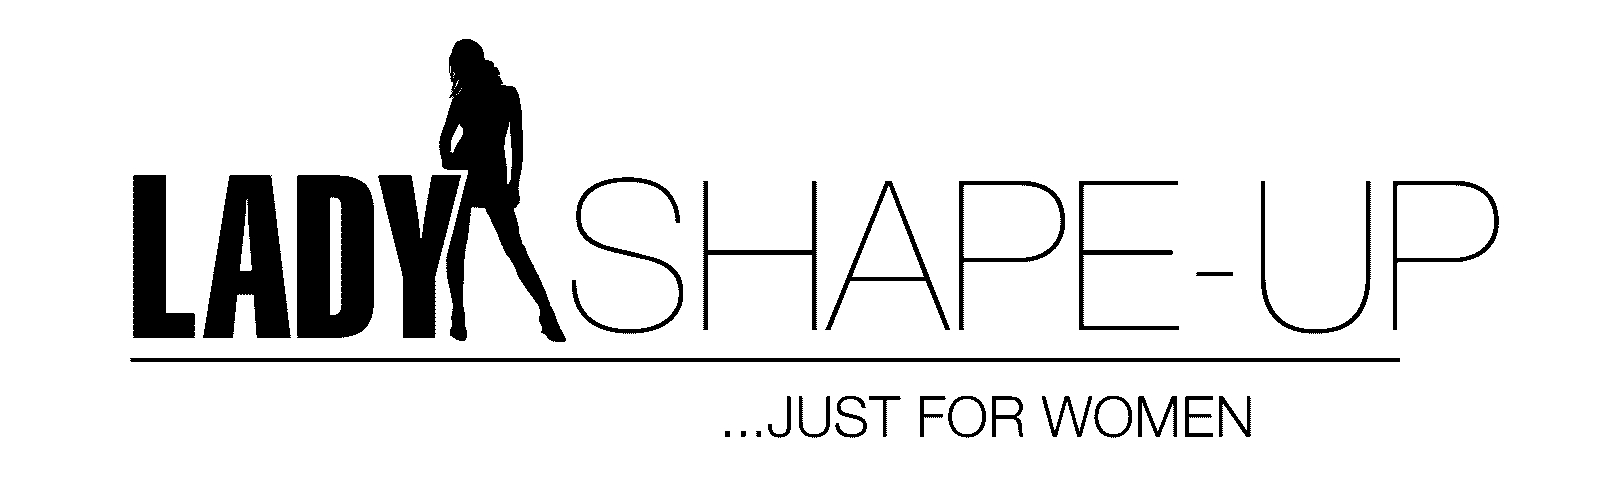 LADY SHAPE-UP ... JUST FOR WOMEN